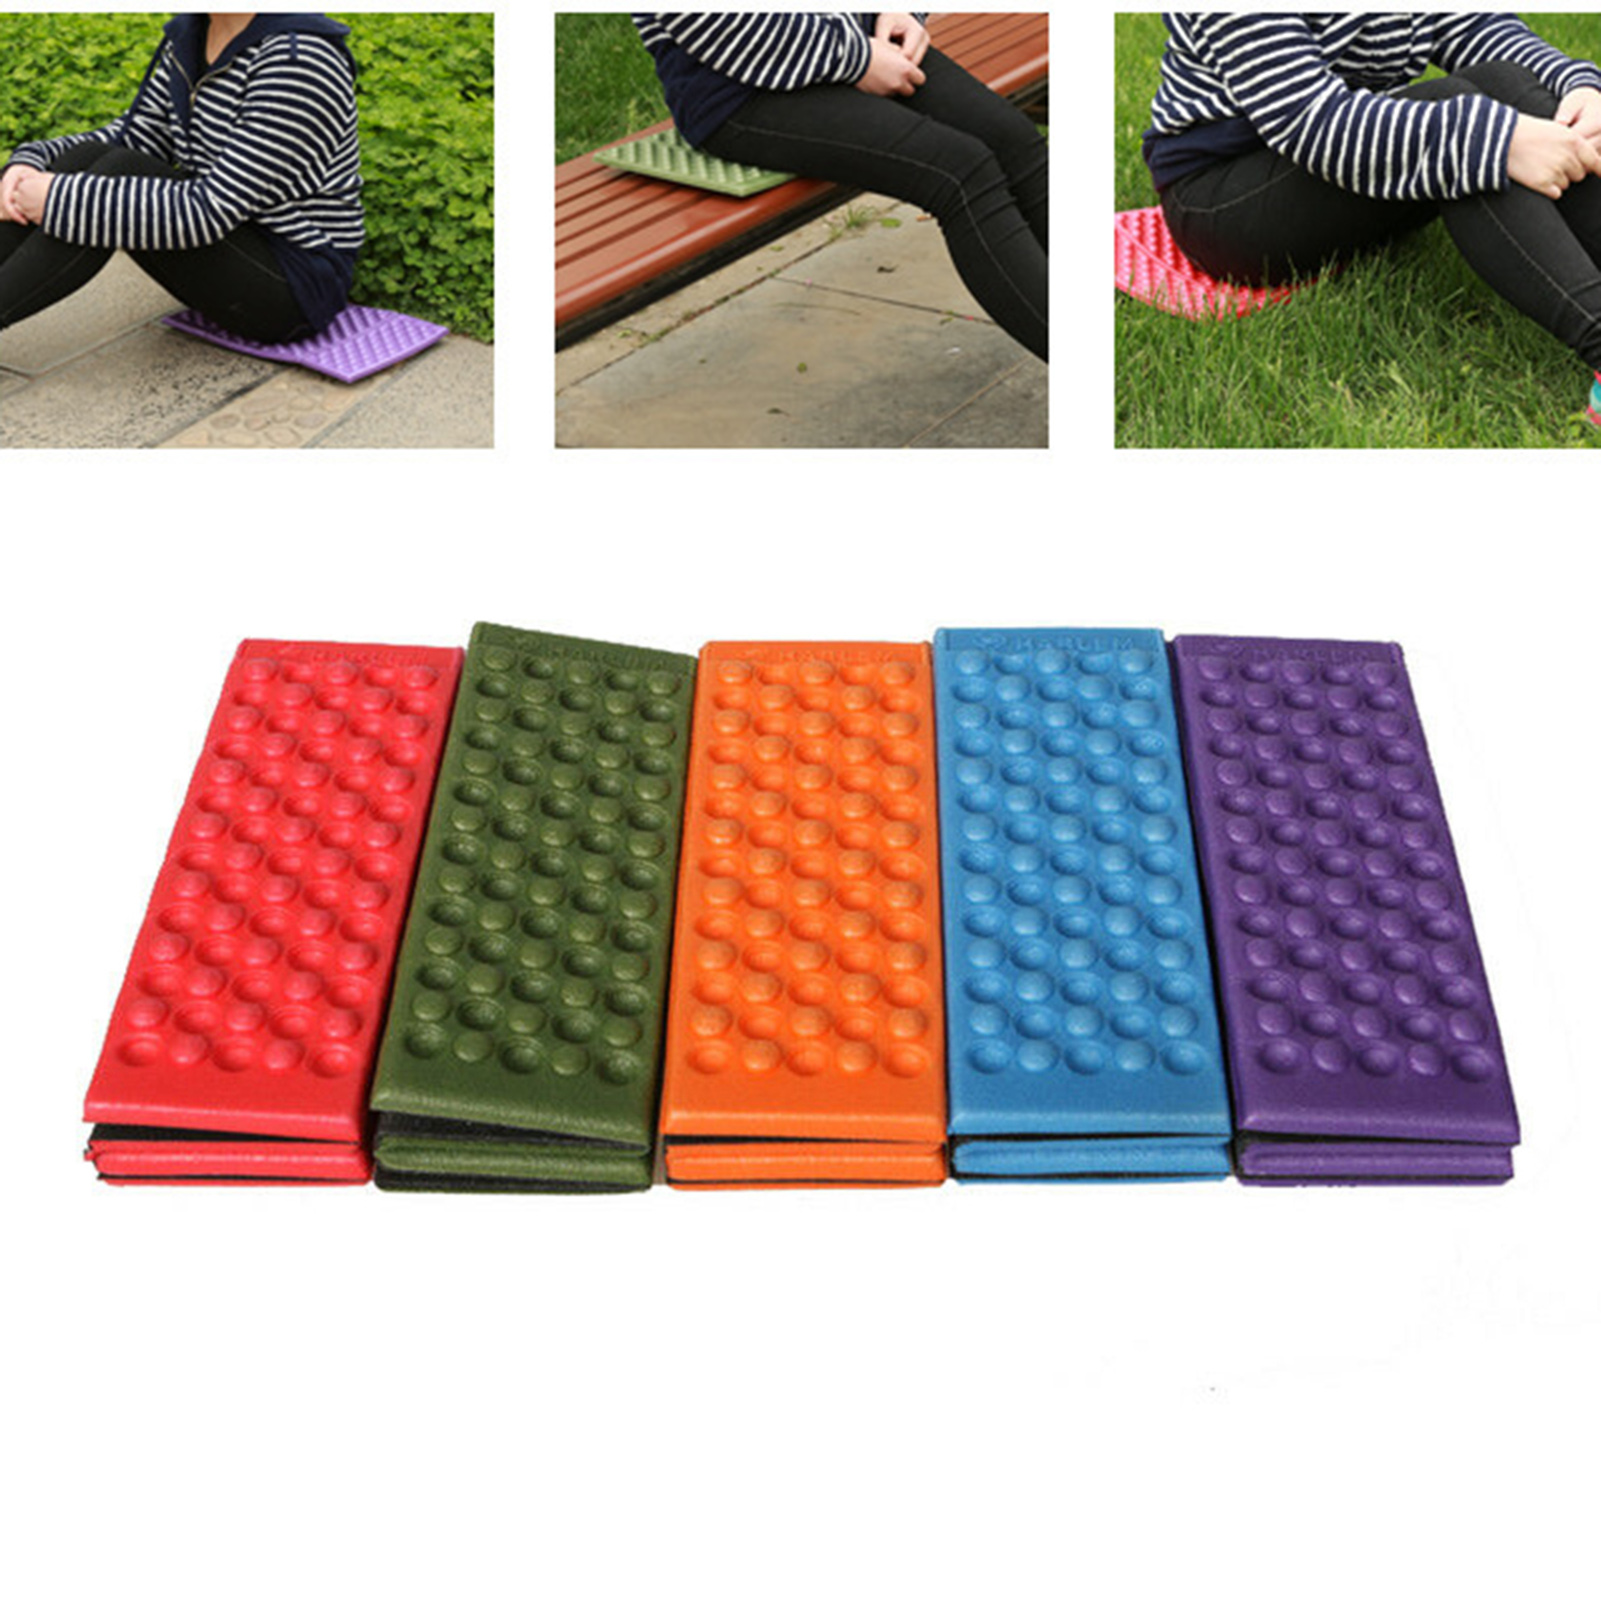 SPRING PARK Portable Lightweight Waterproof Folding Mat, Foldable Foam Sitting Pad for Outdoor Activities, Kneeling and Seat Cushion Chair Picnic Mat - image 3 of 6